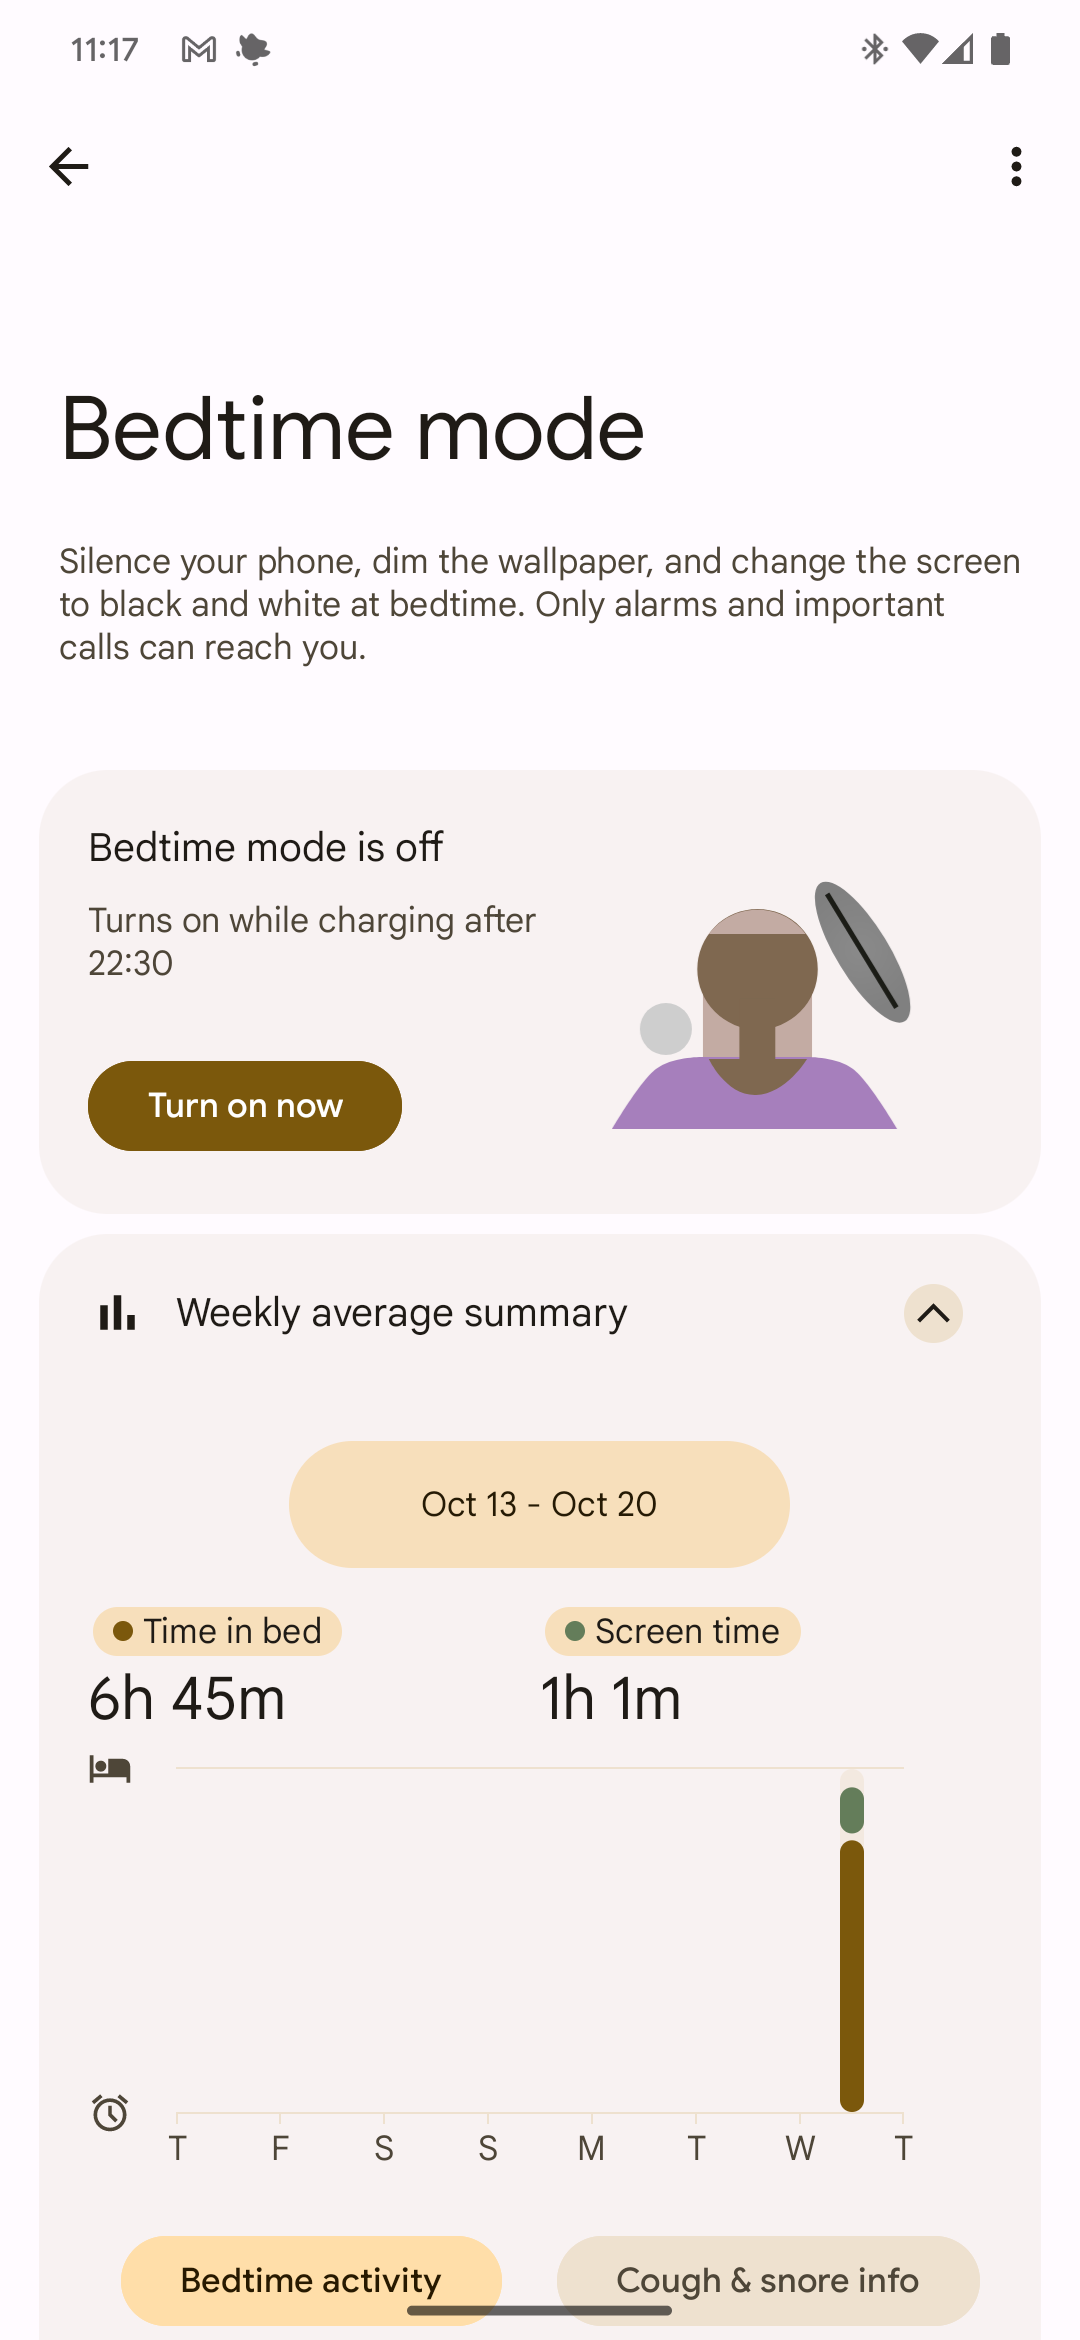 The bedtime mode section of the Digital Wellbeing settings on a Google Pixel phone